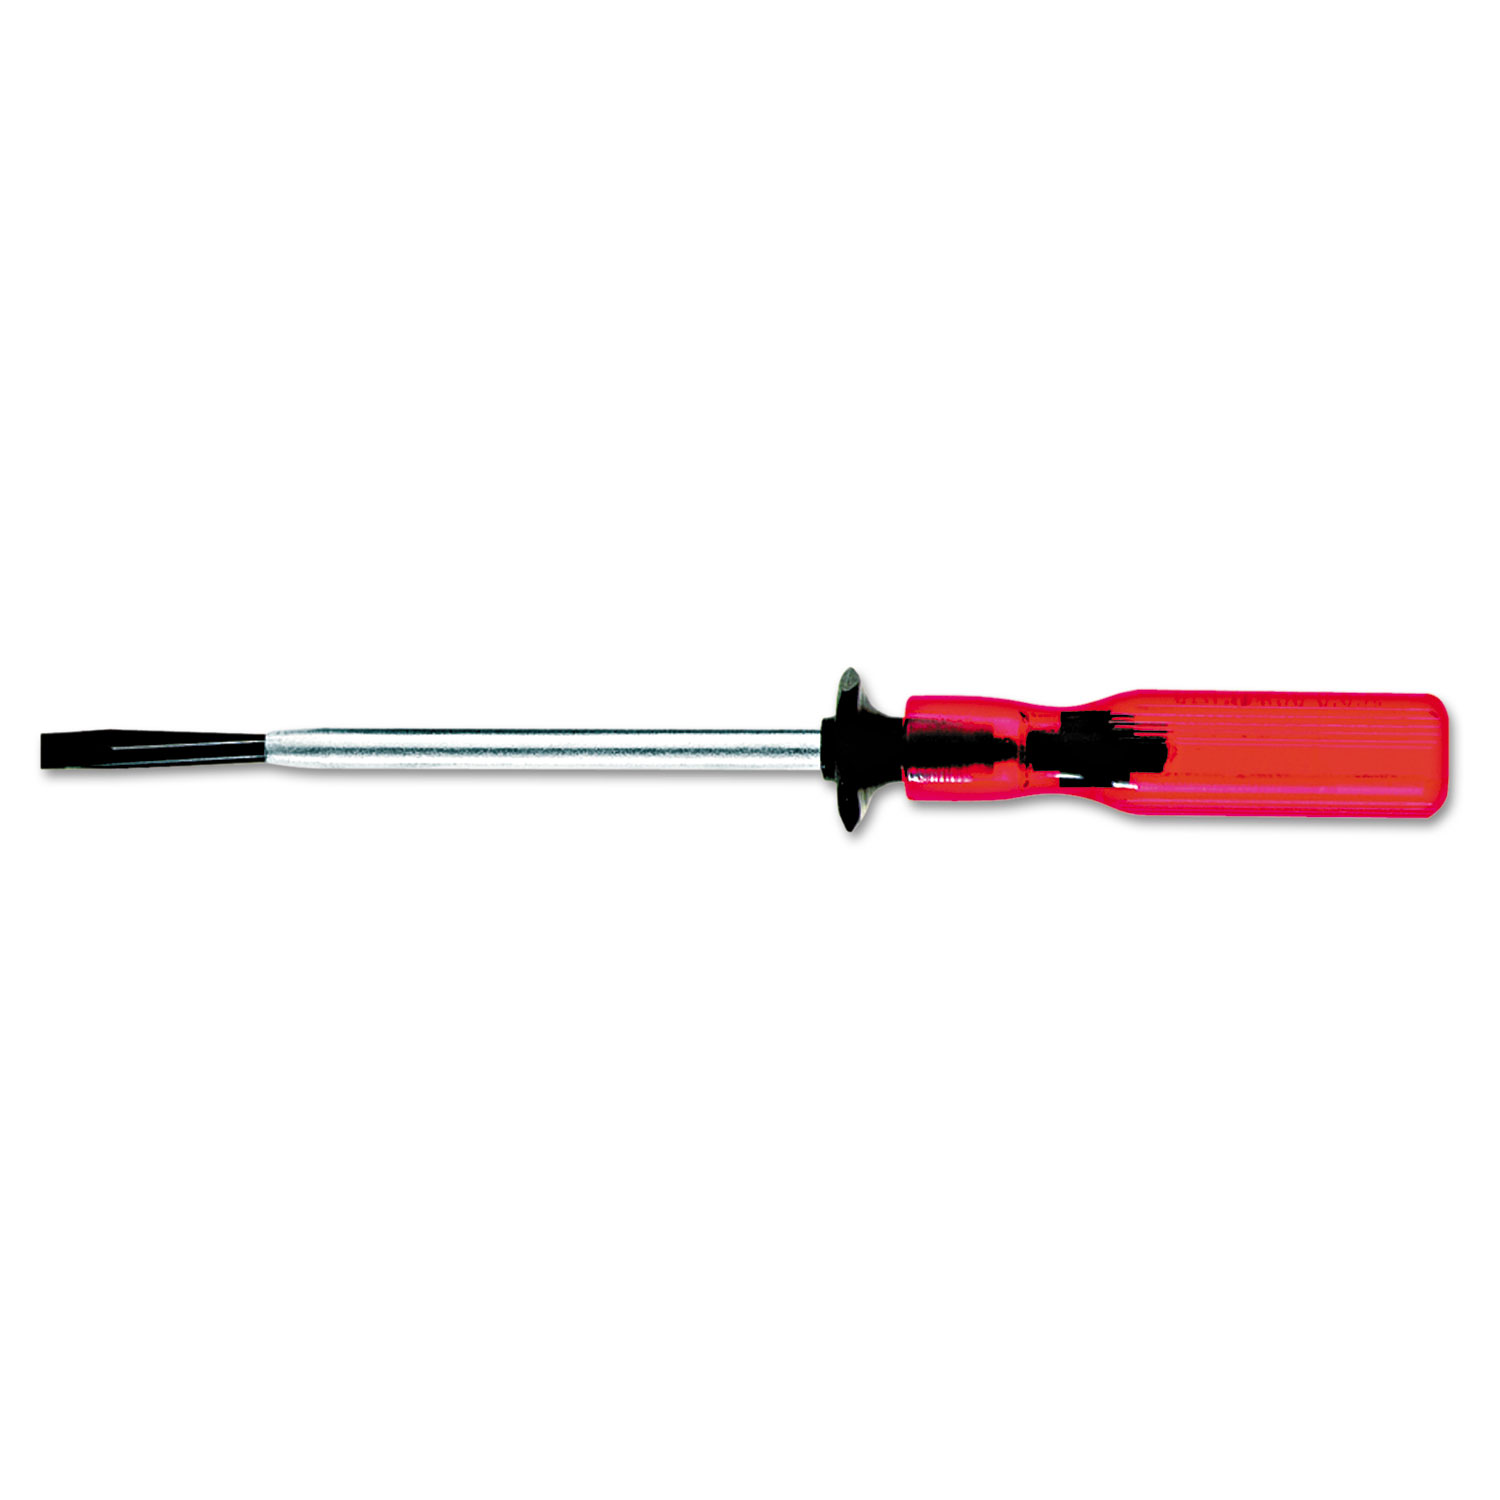 Vaco Slotted Screw-Holding Screwdriver, 1/4in, 9 3/4in Long